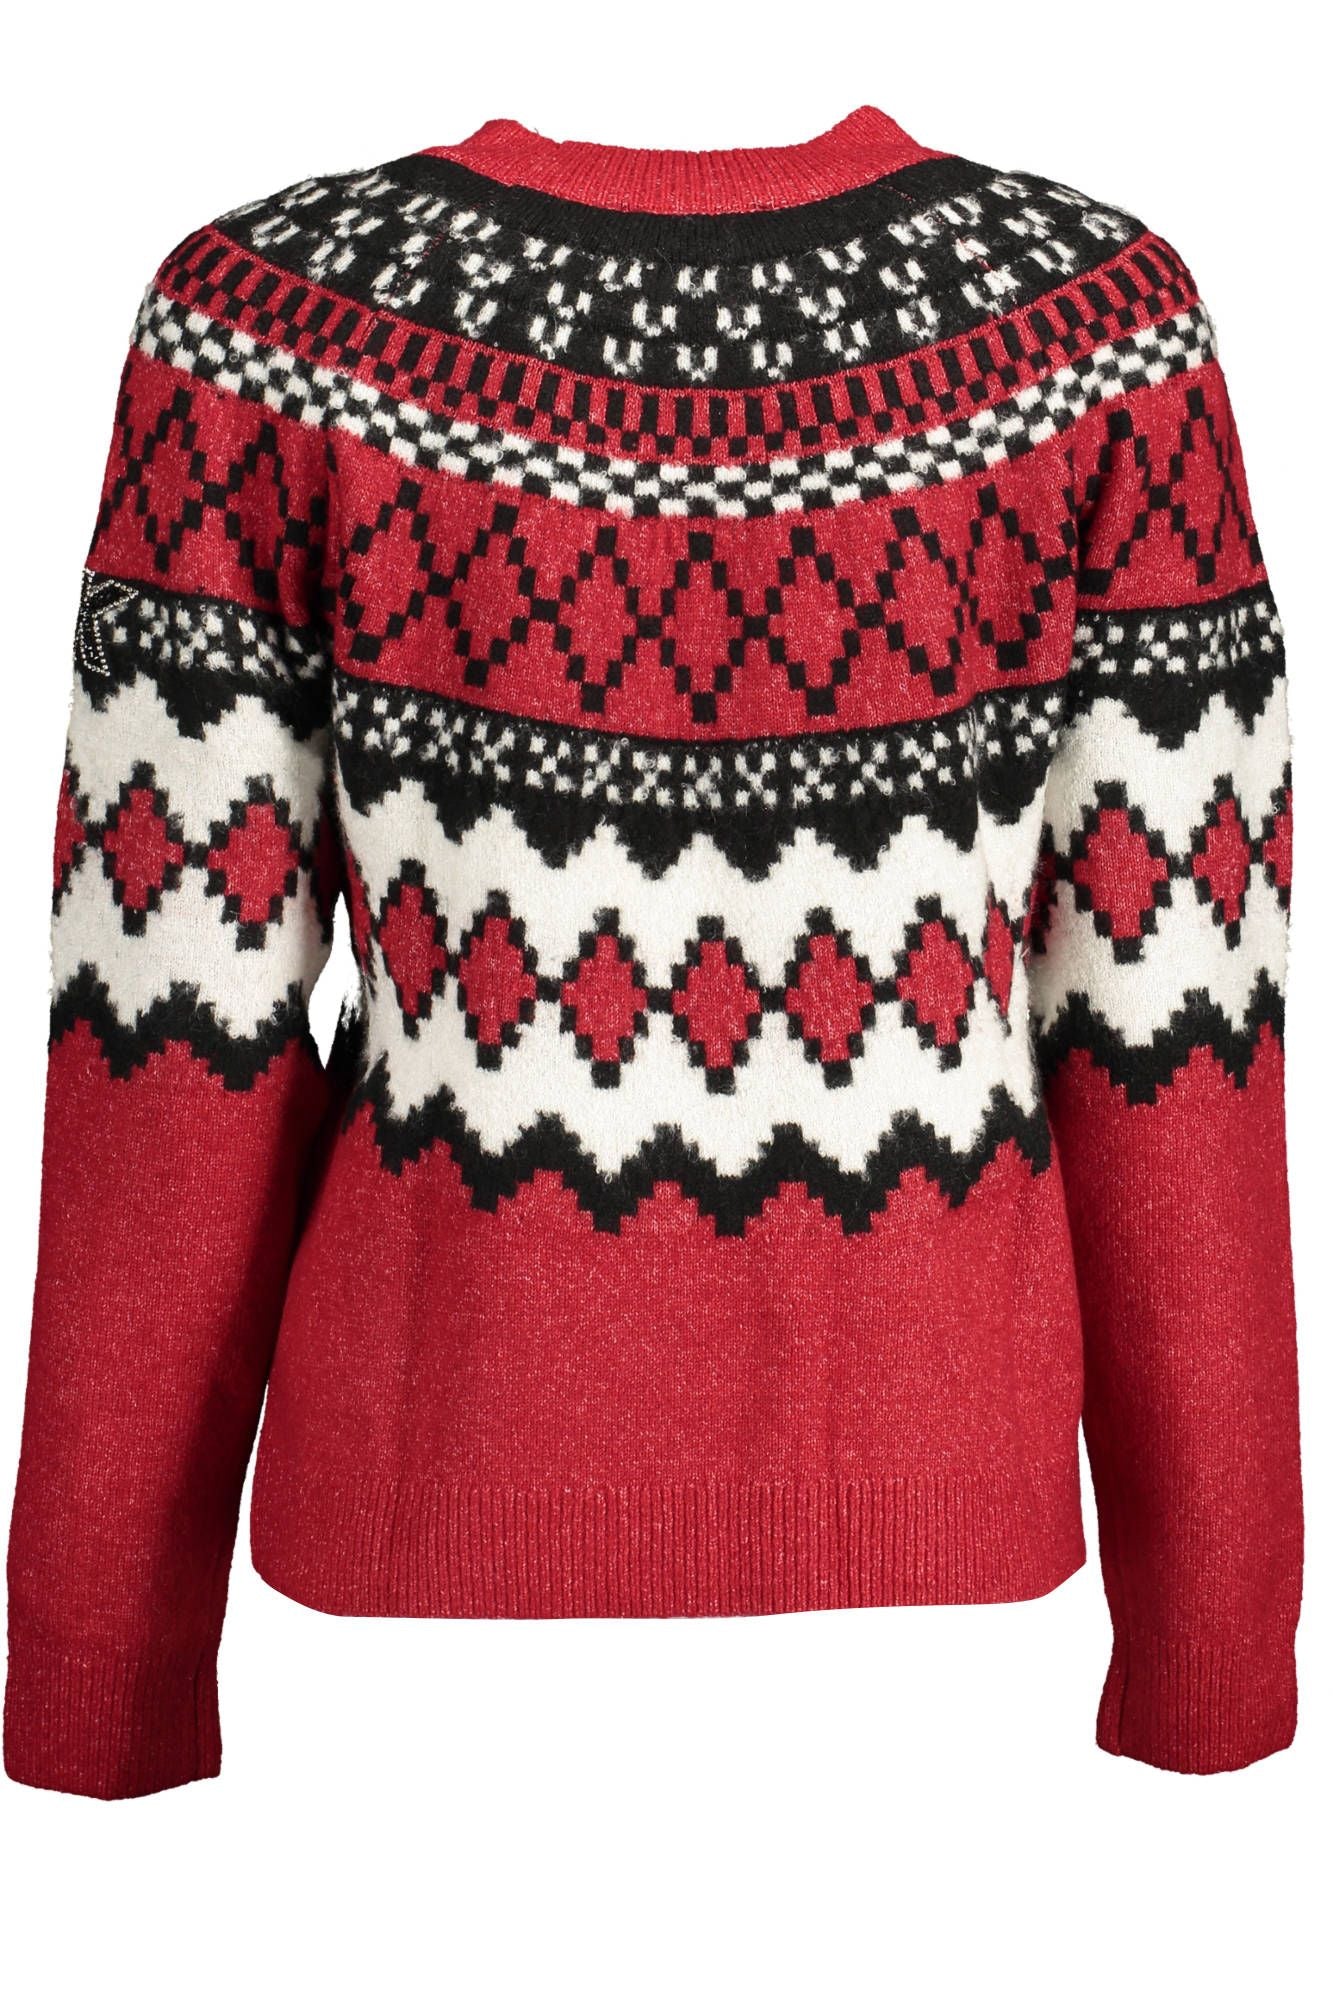 Desigual Elegant High Collar Sweater with Contrasting Details